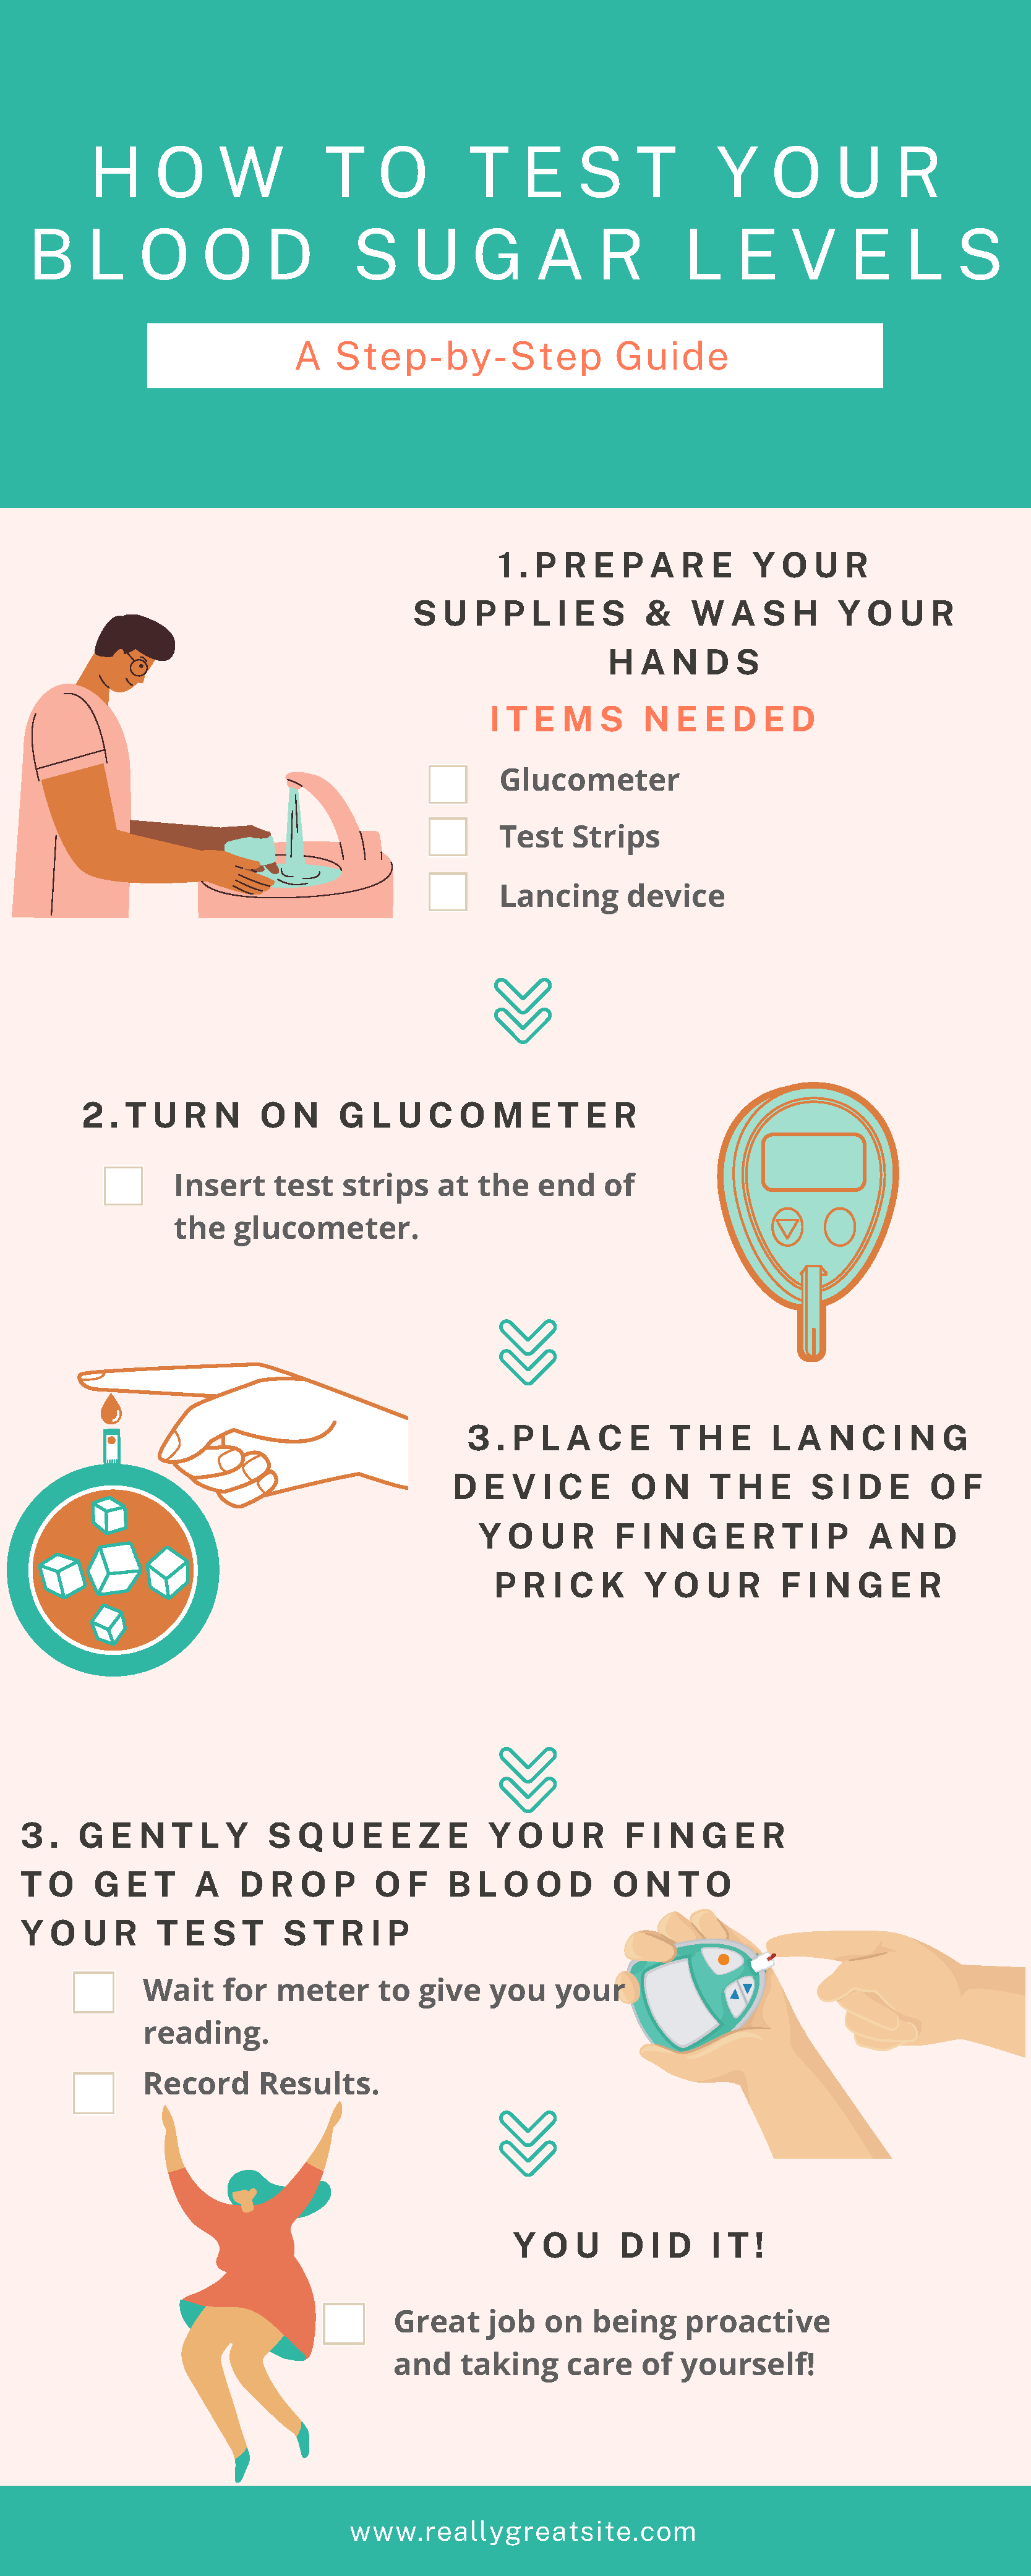 How To Test Your Blood Sugar Infographic